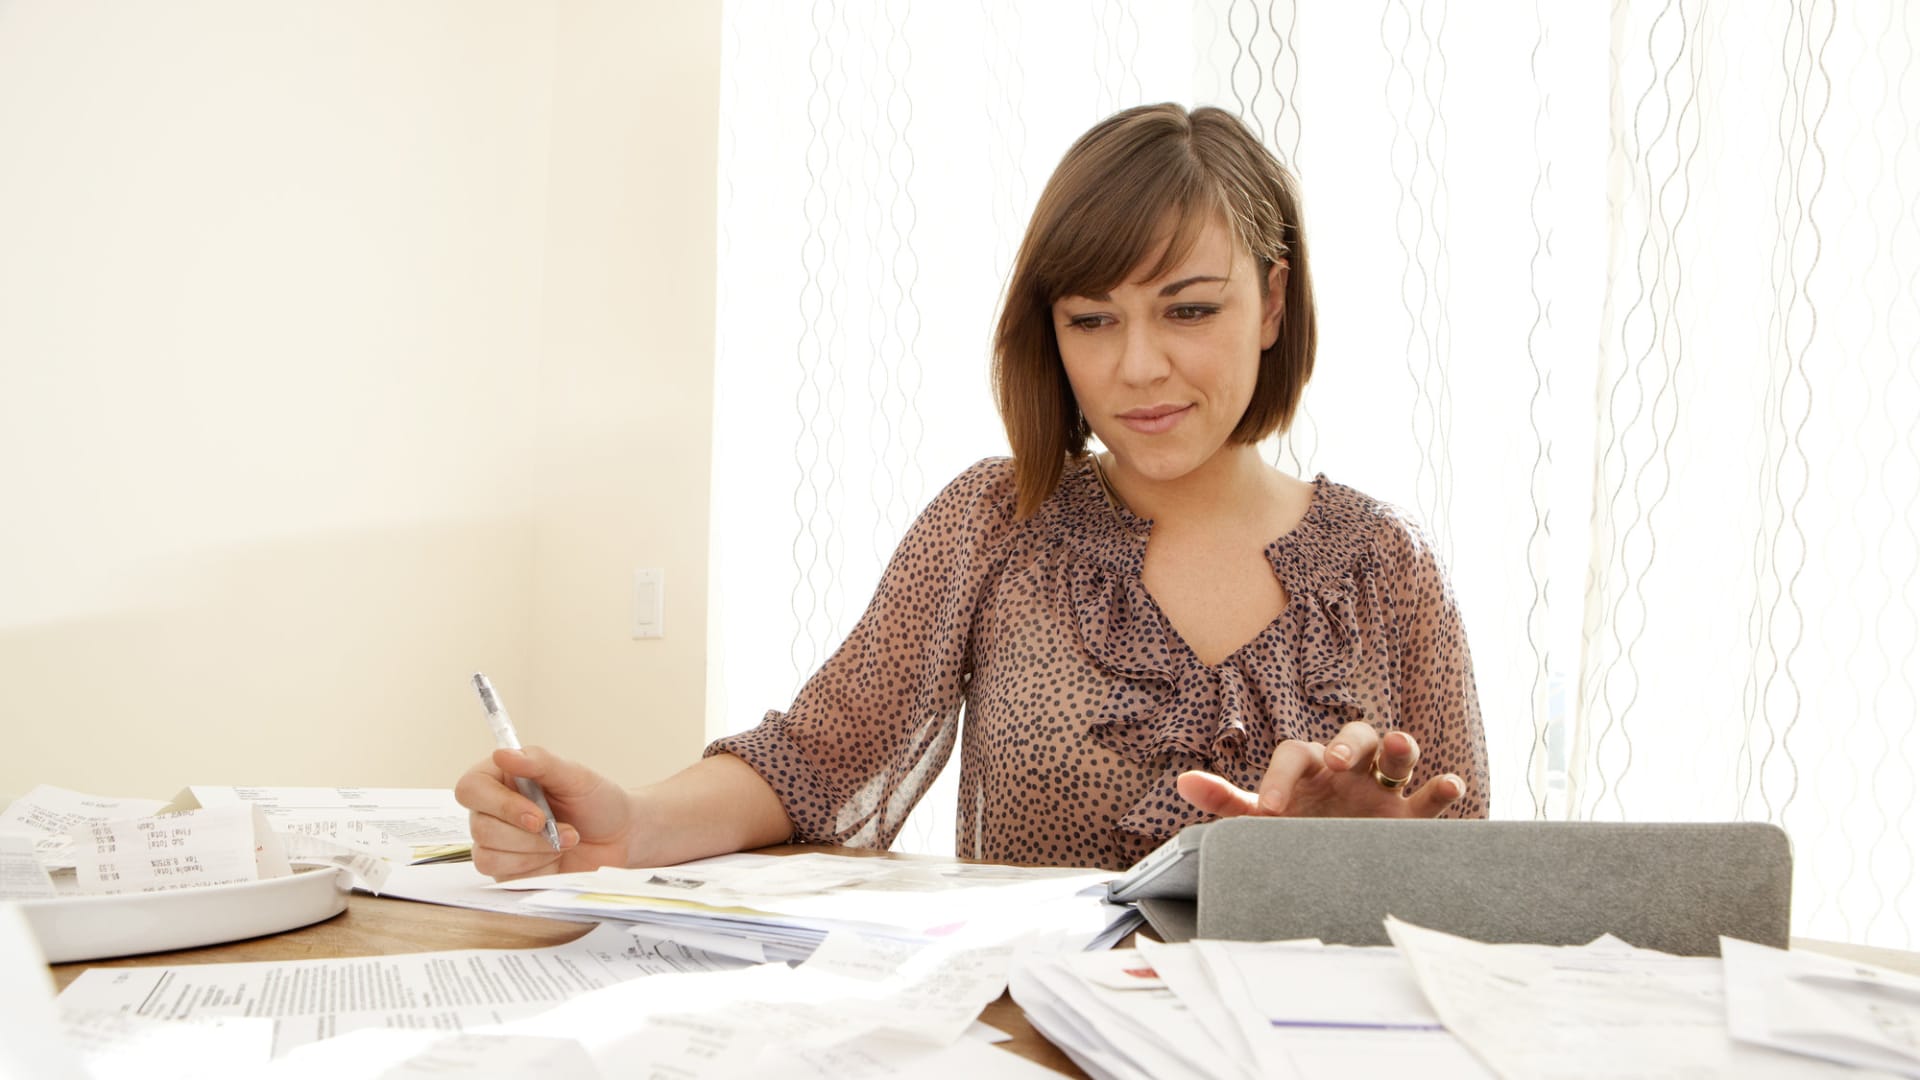 There's no better time to think about next year's taxes than right after you file this year.